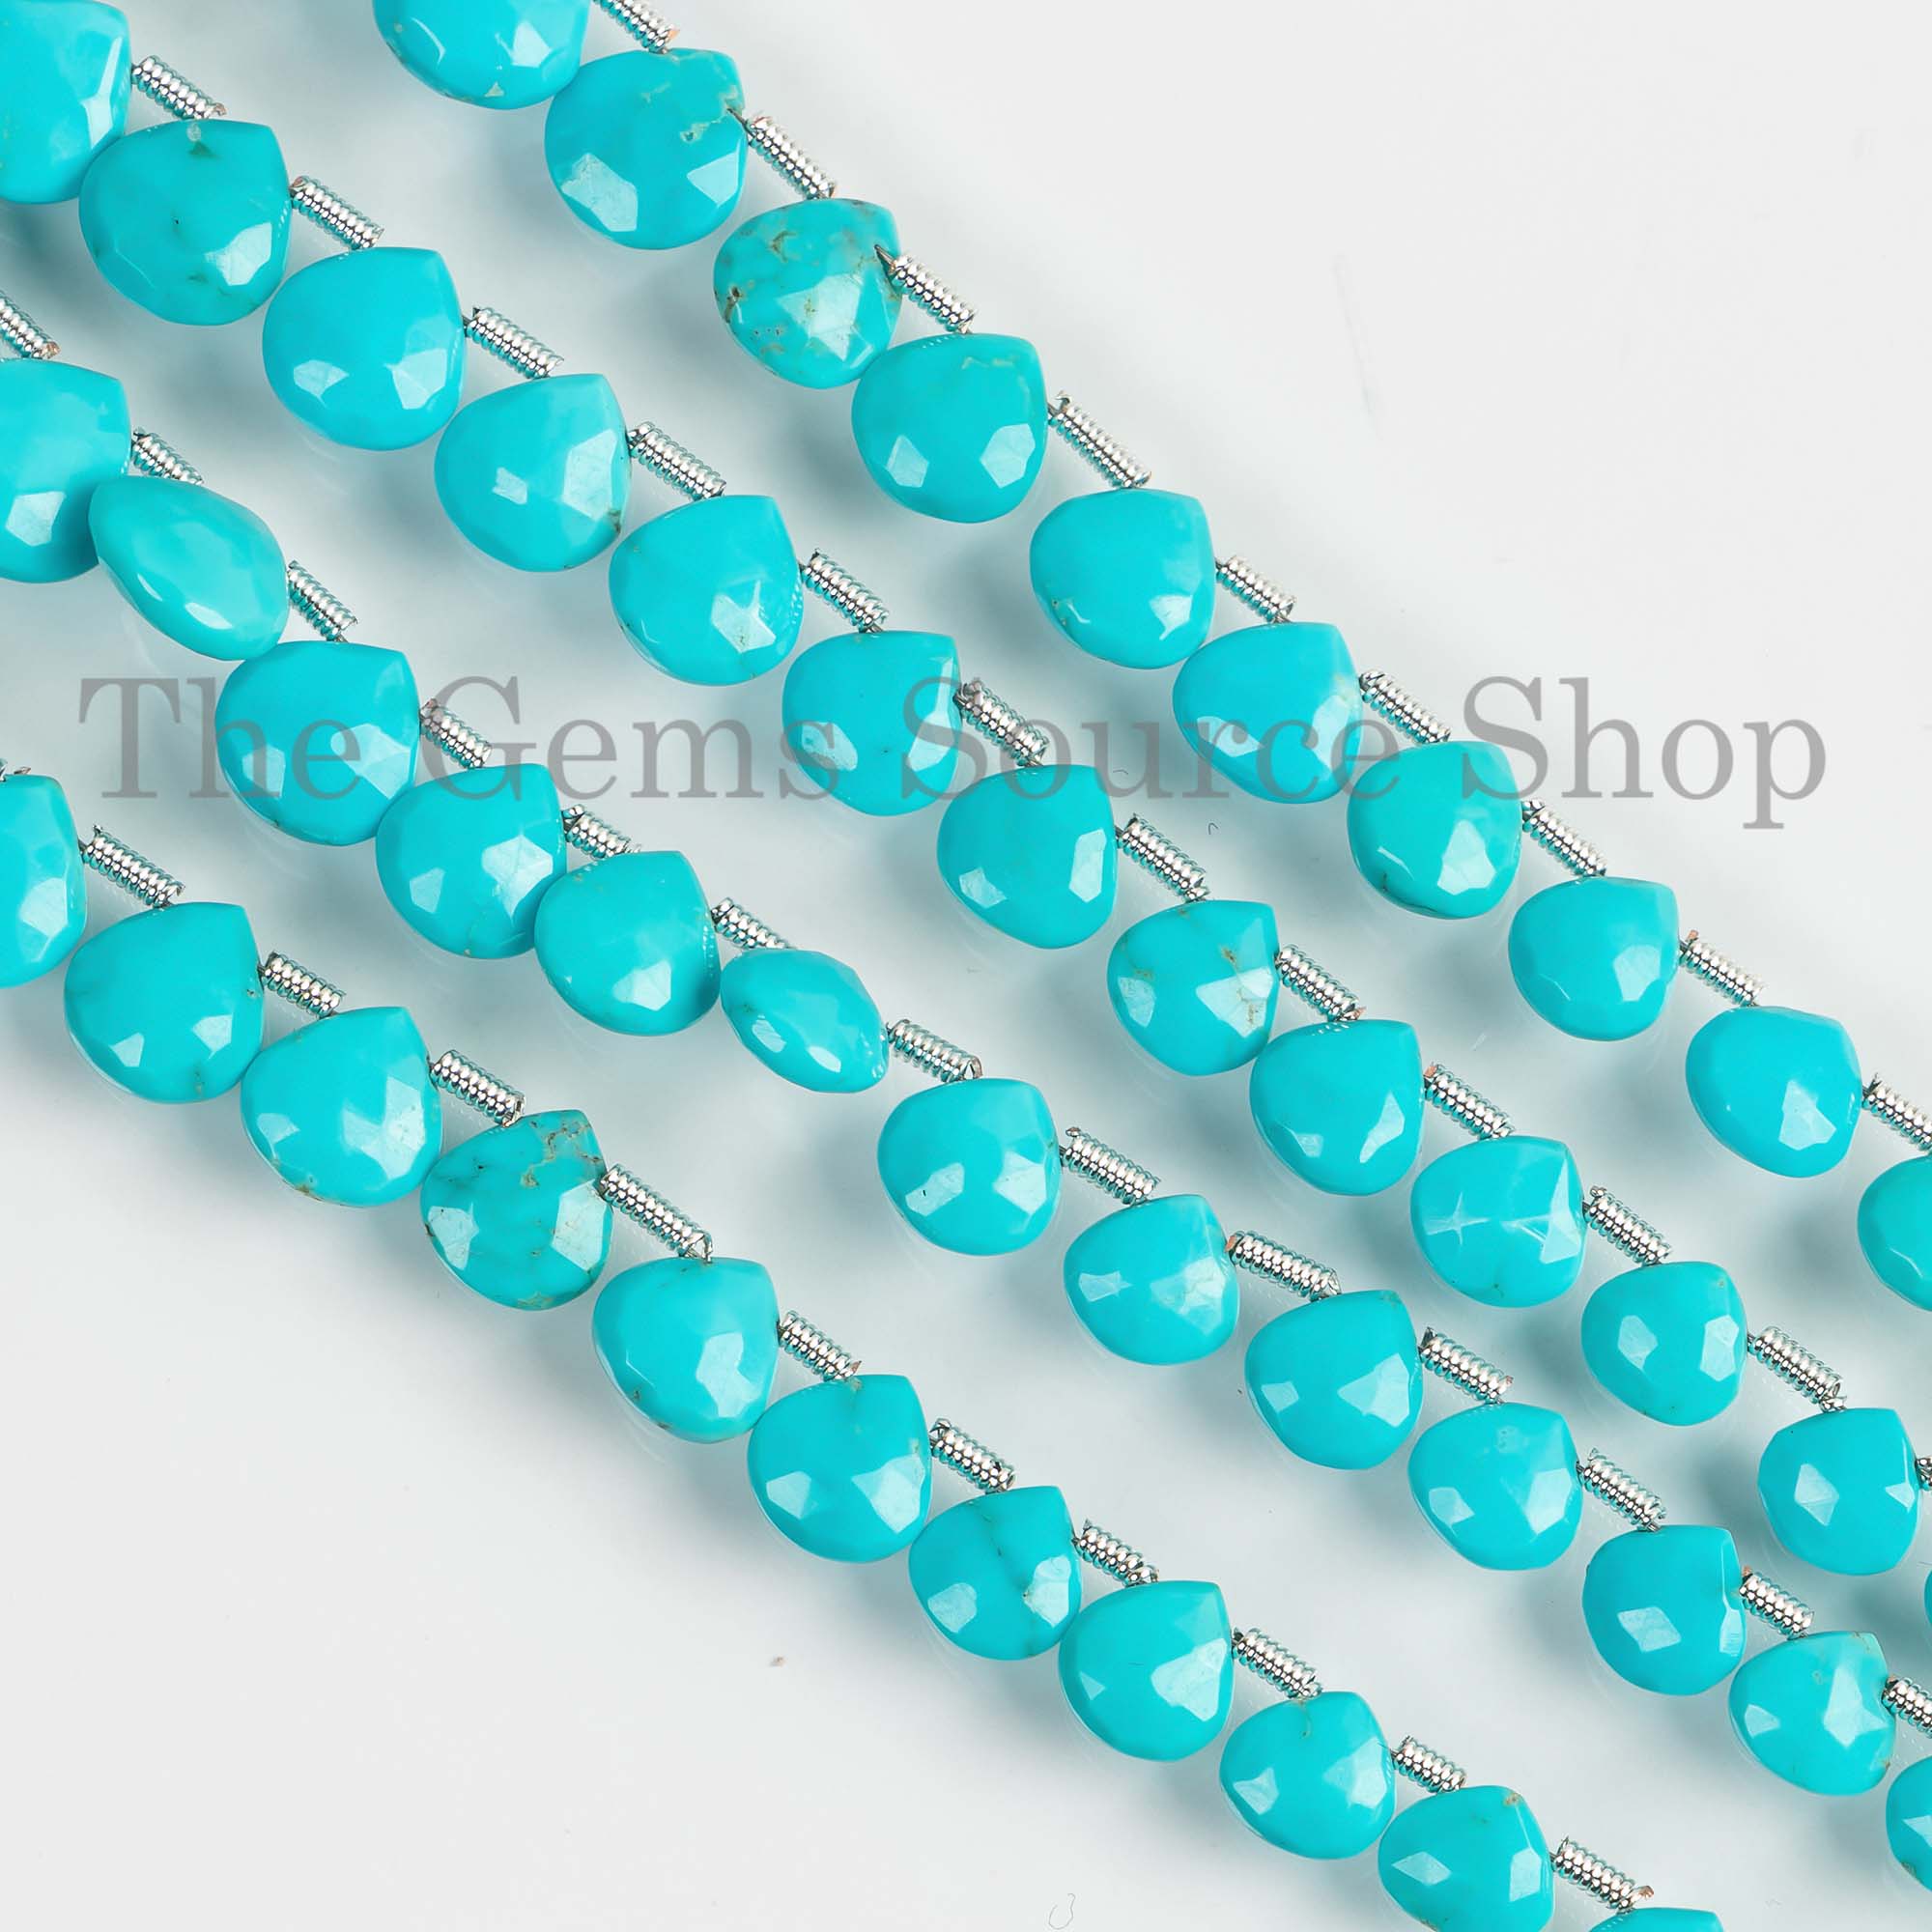 6-9mm Top Quality Sleeping Beauty Turquoise Beads, Turquoise Gemstone Beads, Heart Shape Briolettes, Jewelry Making, Faceted Heart Beads